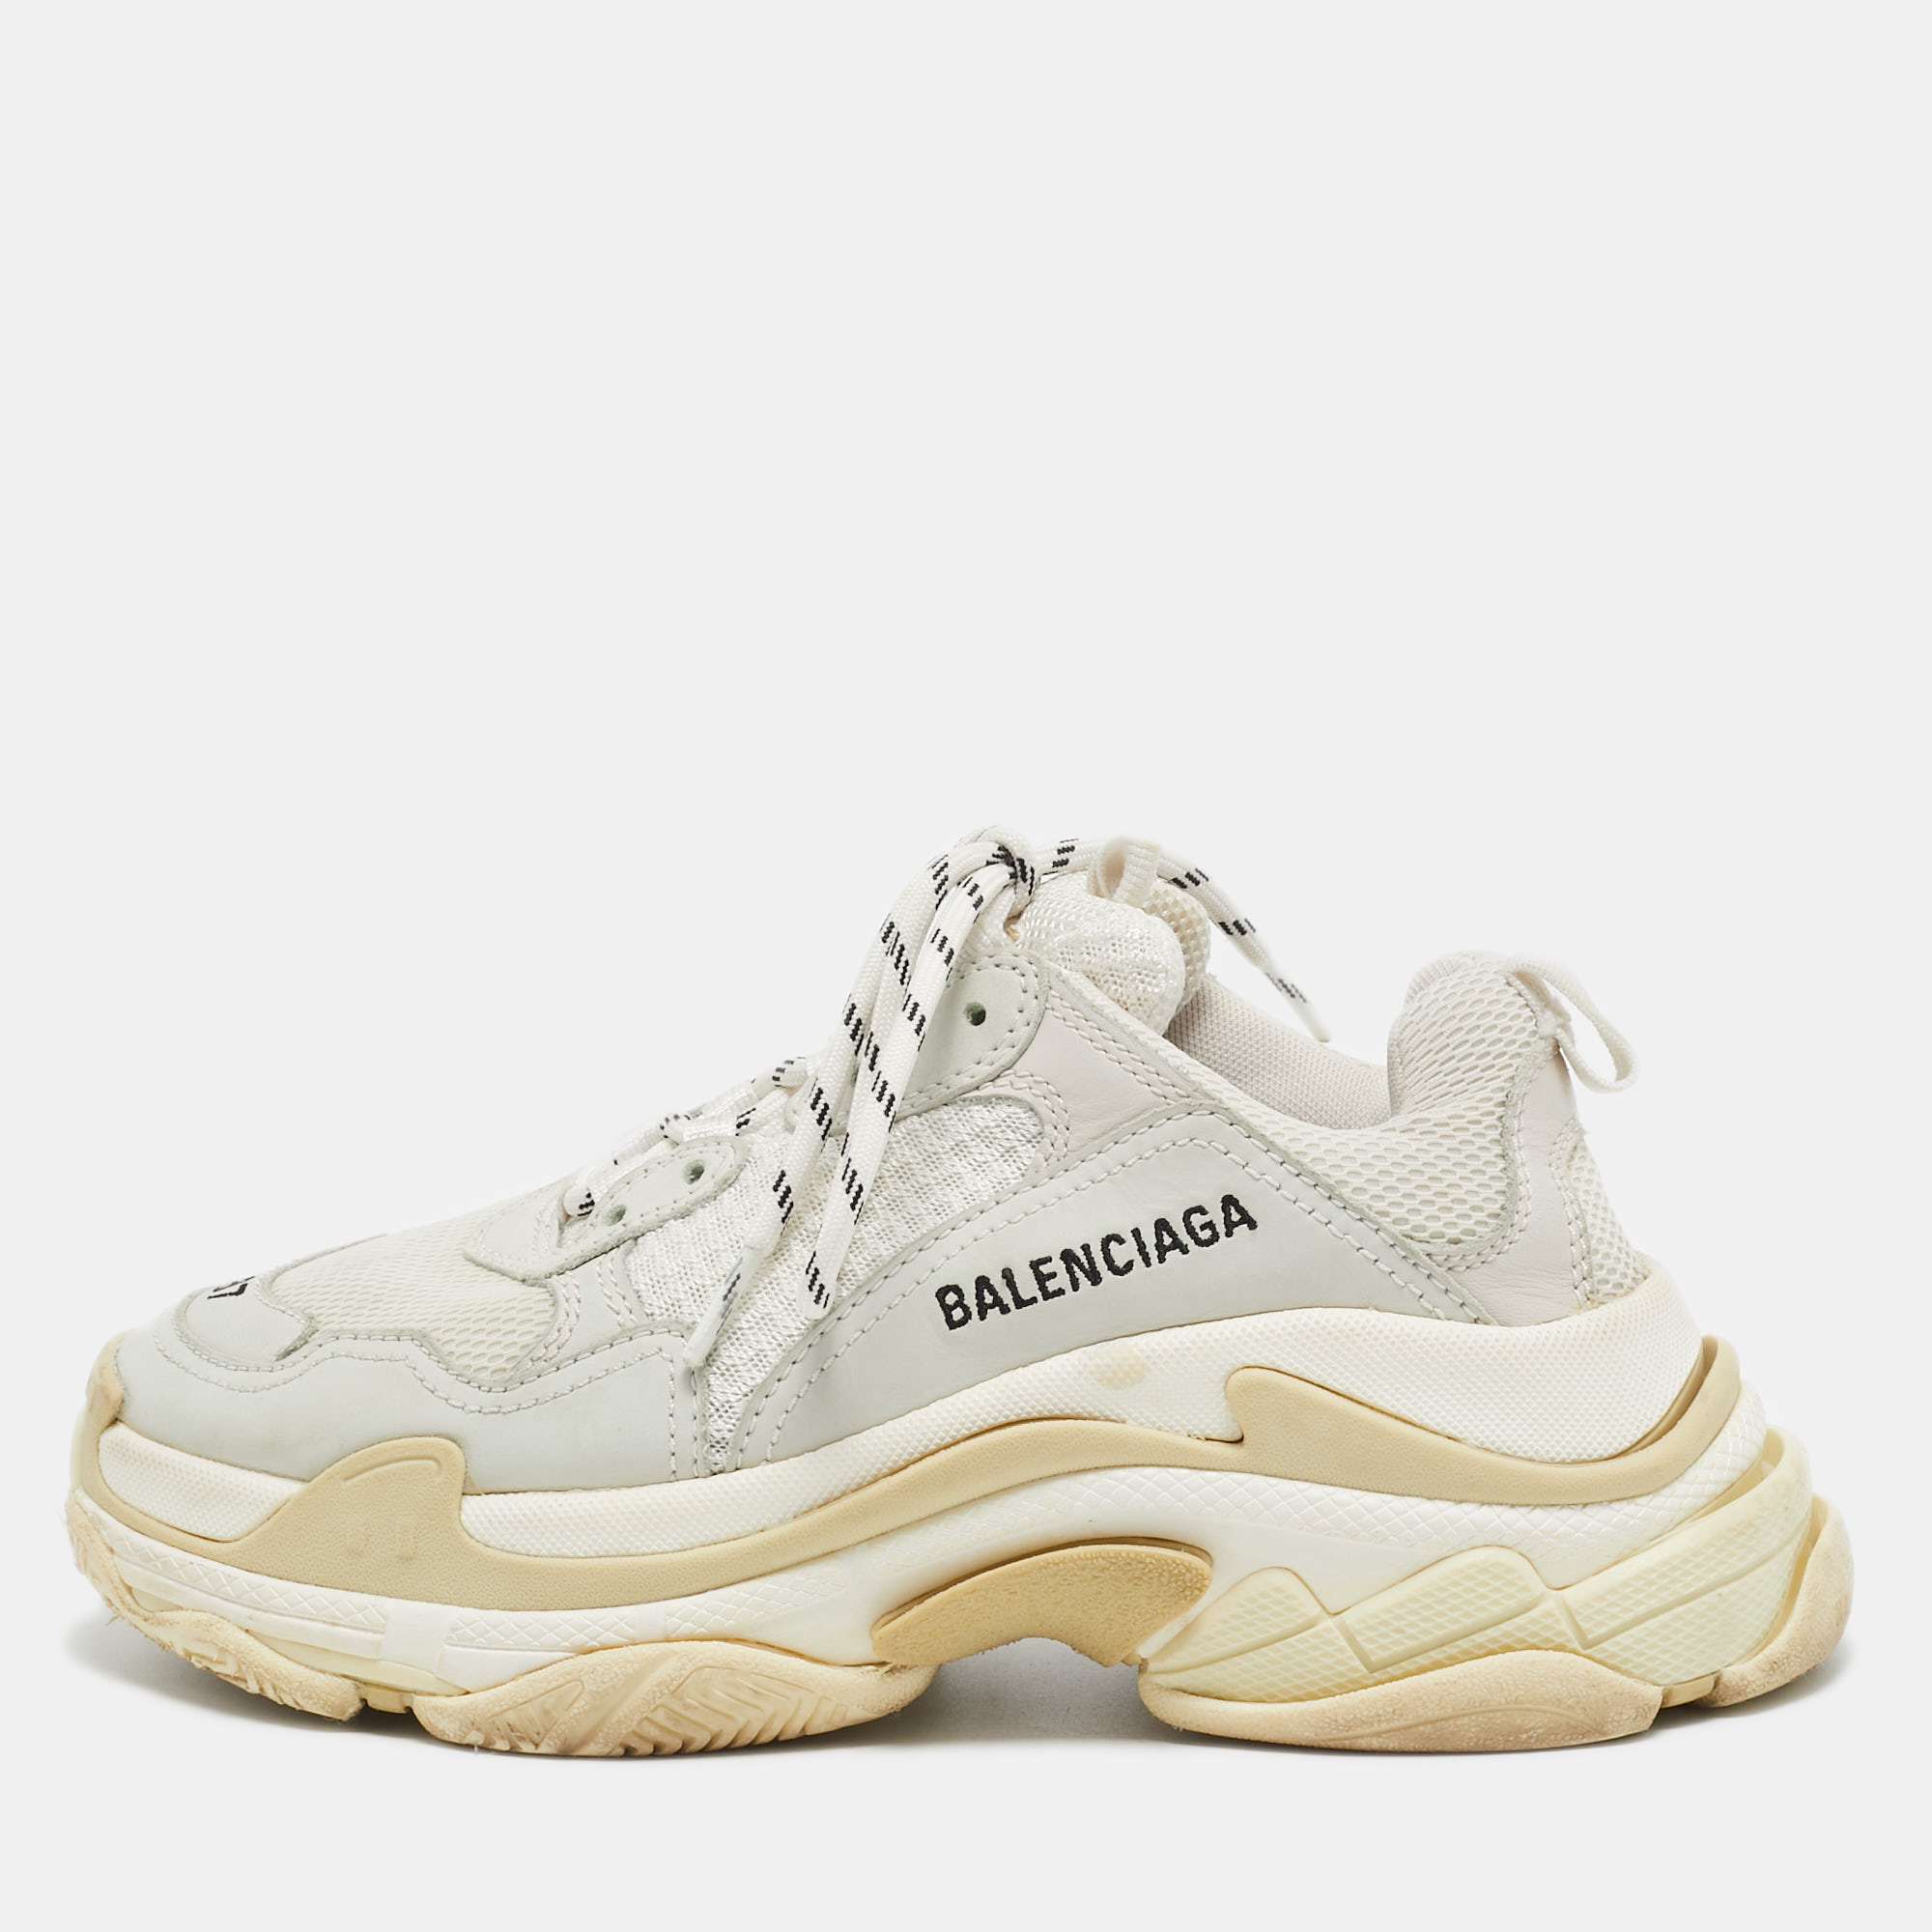 Balenciaga white/grey mesh and leather triple s sneakers size 37